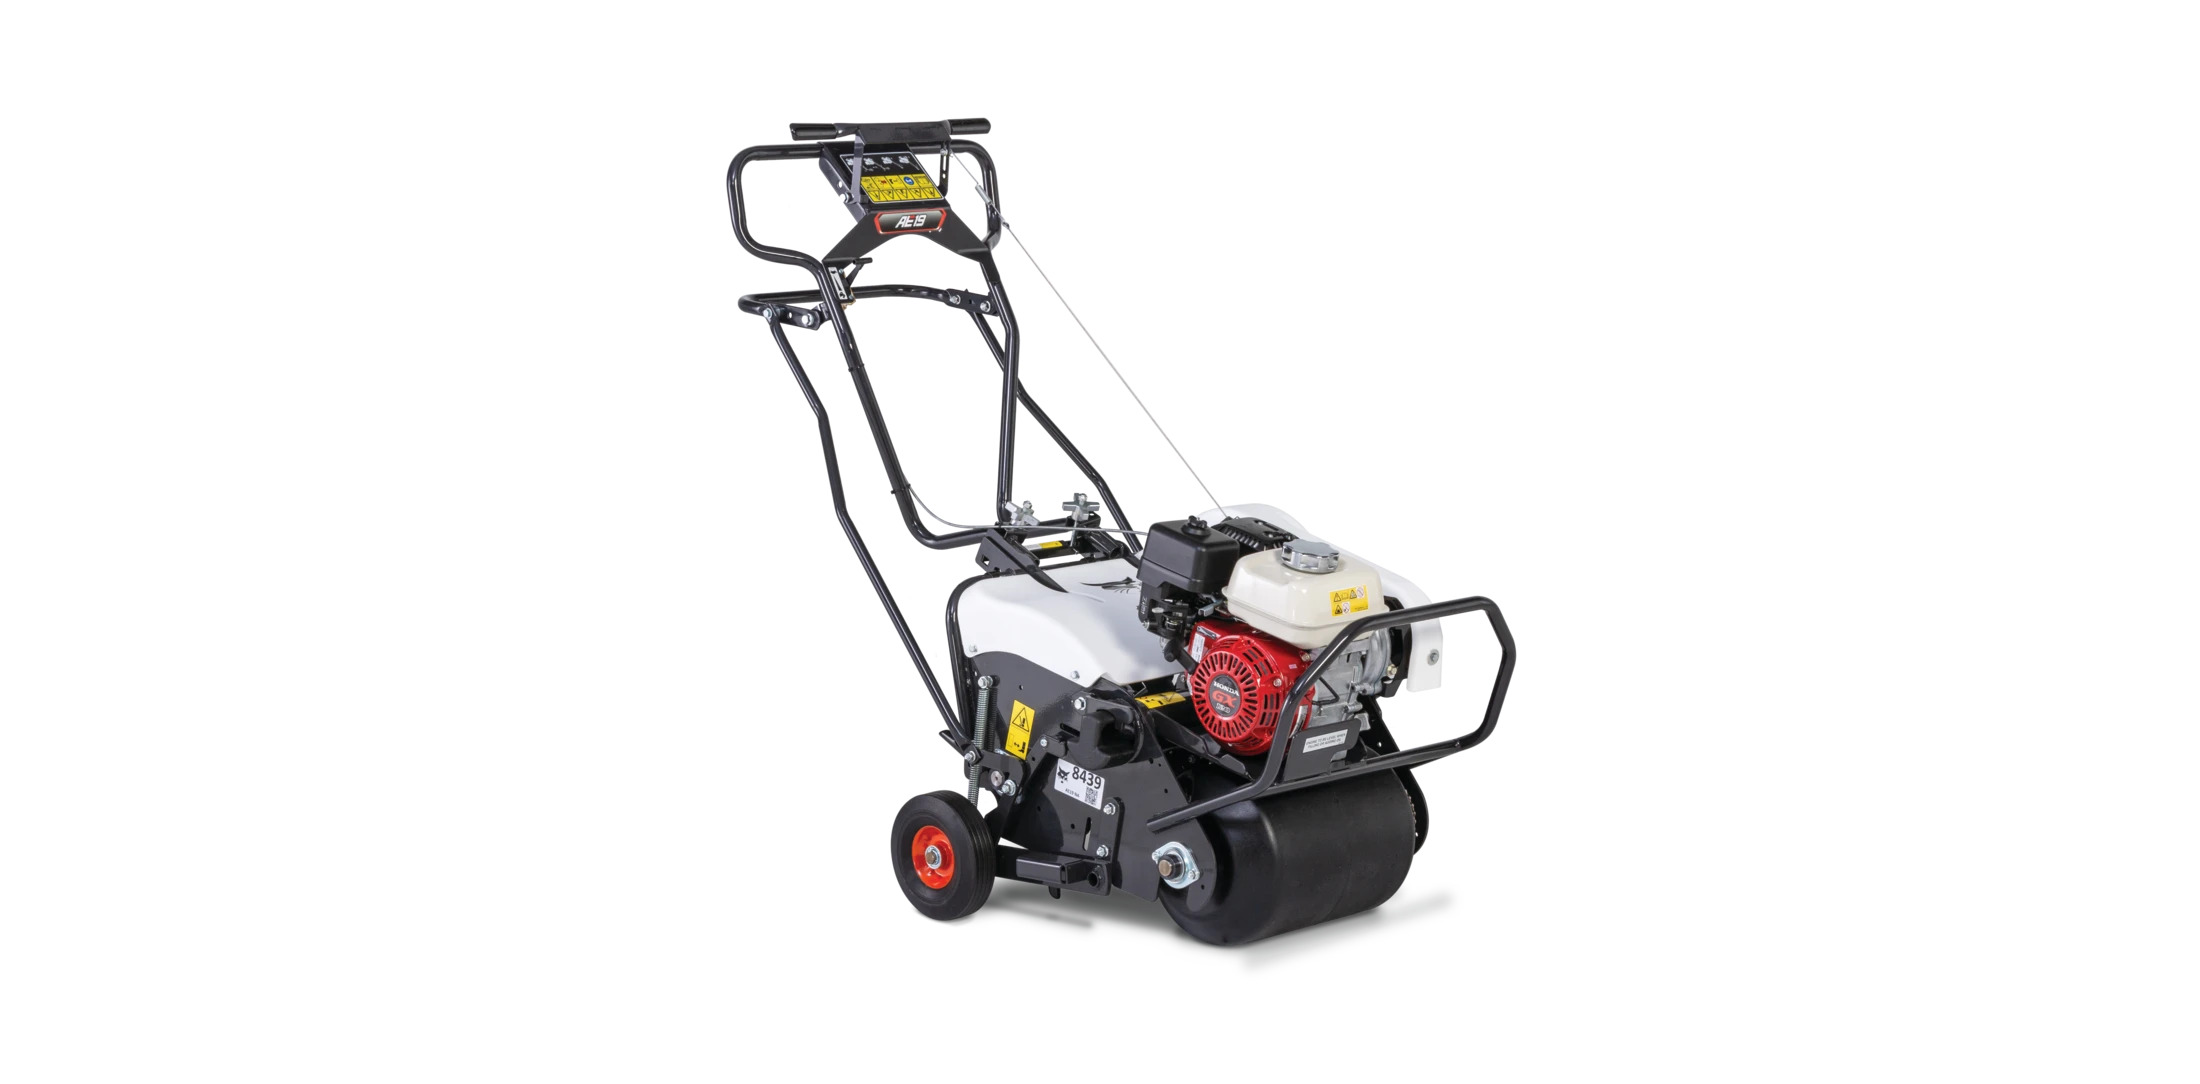 Browse Specs and more for the Bobcat AE19 Walk-Behind Aerator - Bobcat of Huntsville